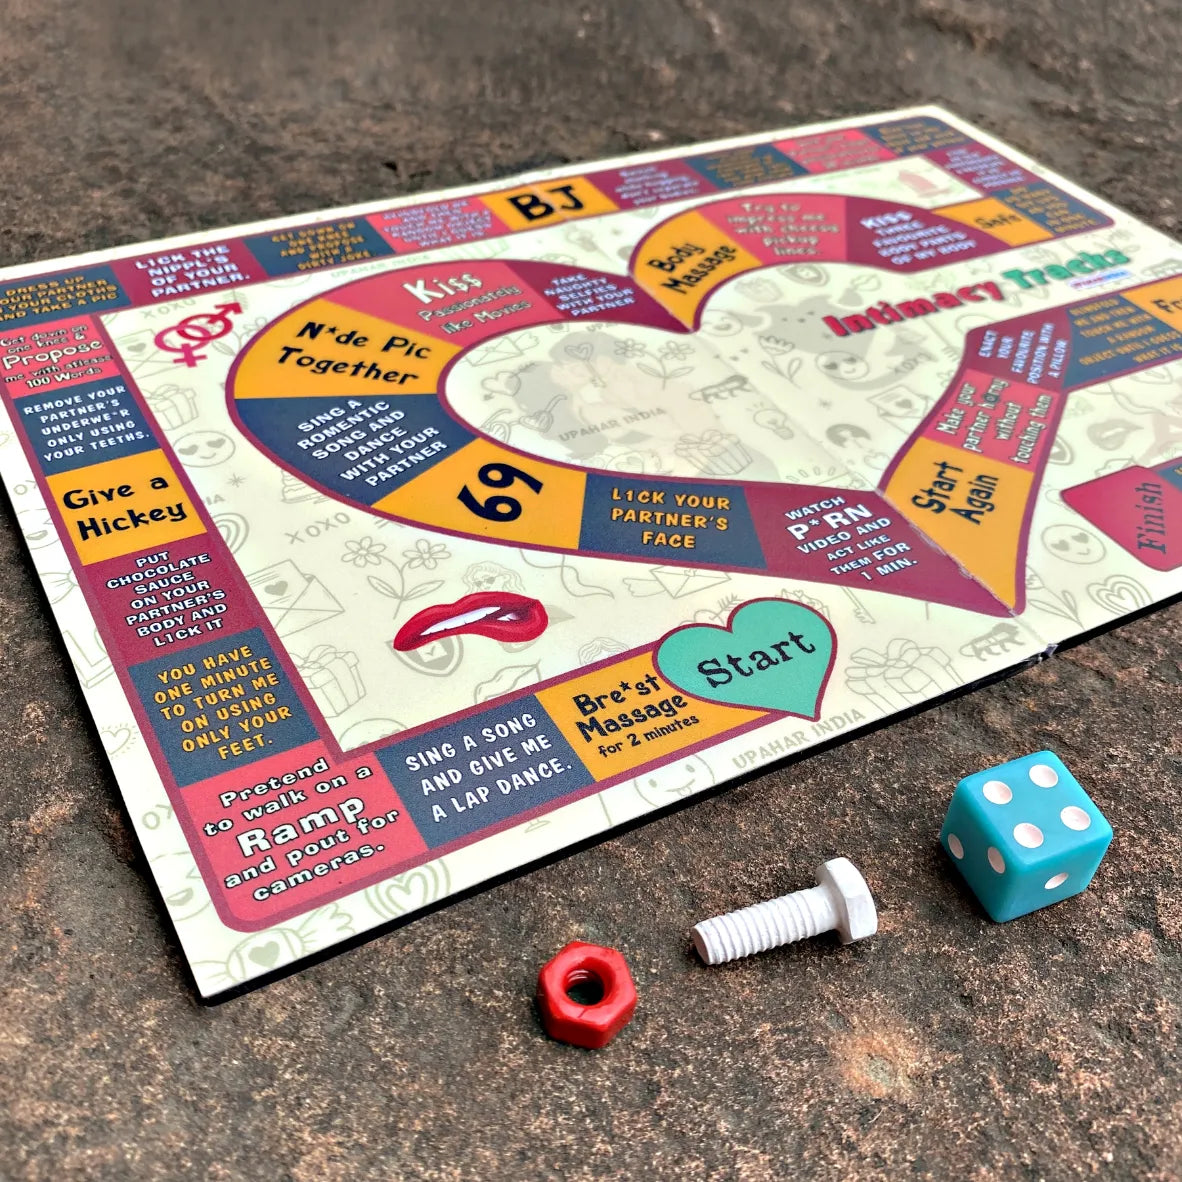 Intimacy Tracks | Naughty Board Game for Couples